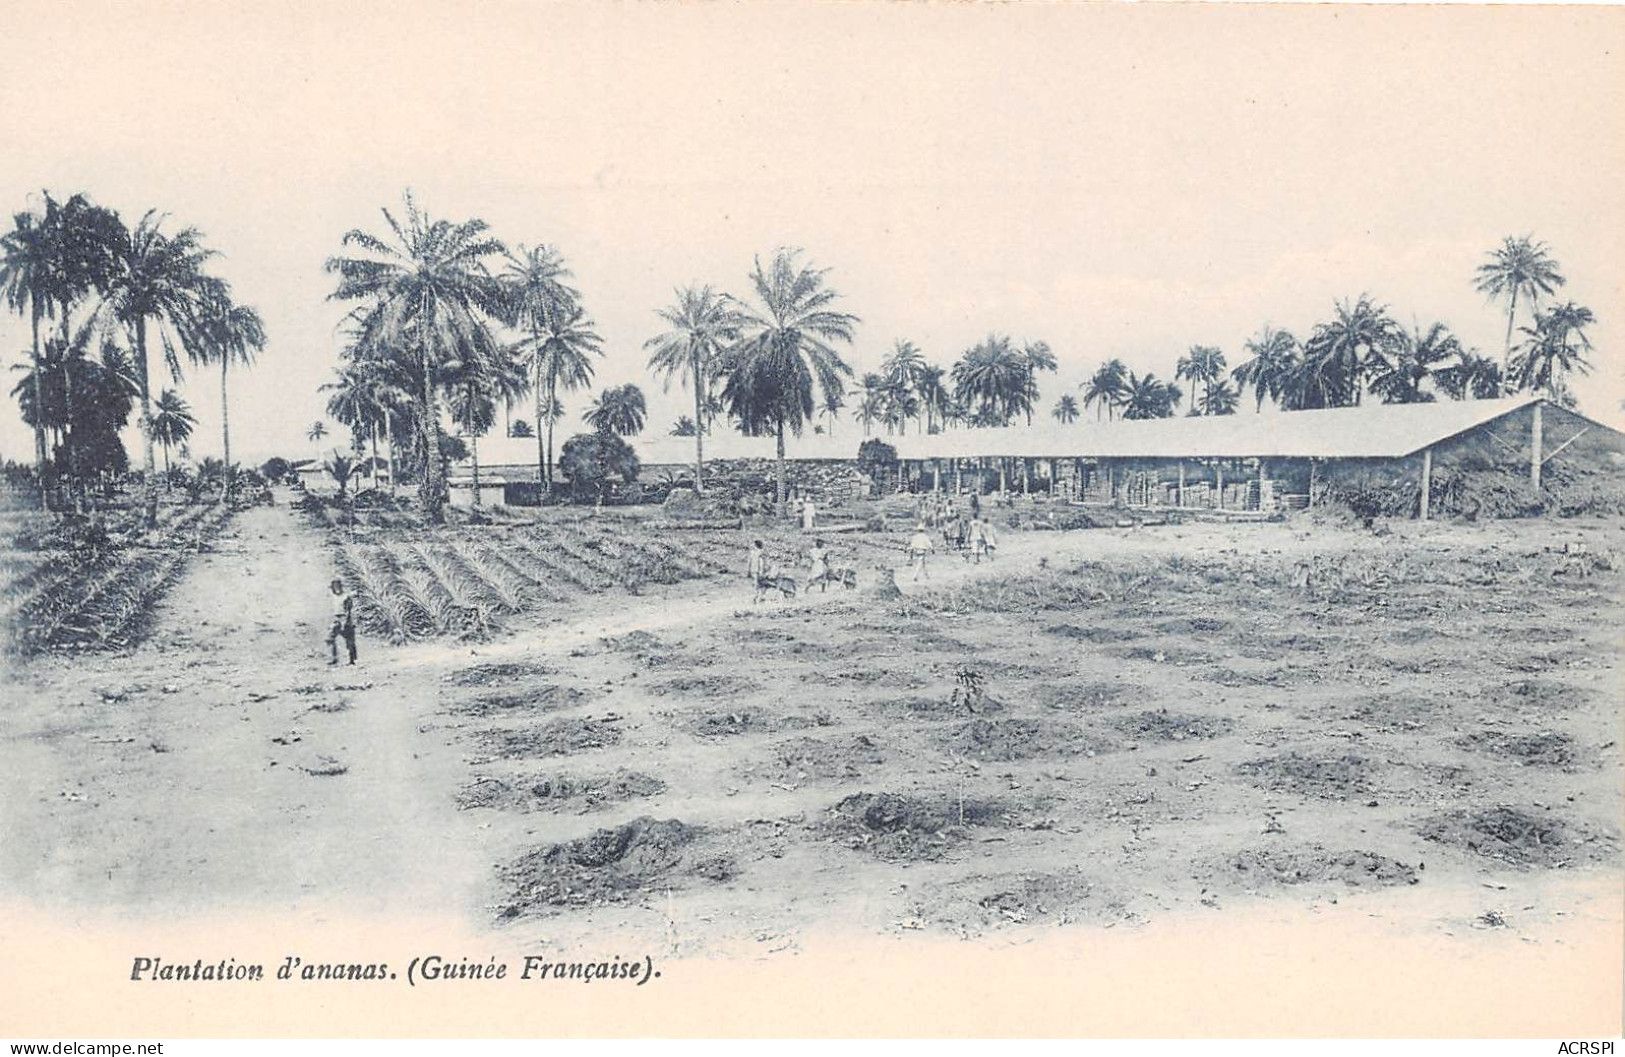 GUINEE Francaise EXPLOITATION AGRICOLE  Une Plantation D'ANANAS Ferme (scan Recto-verso) OO 0950 - French Guinea